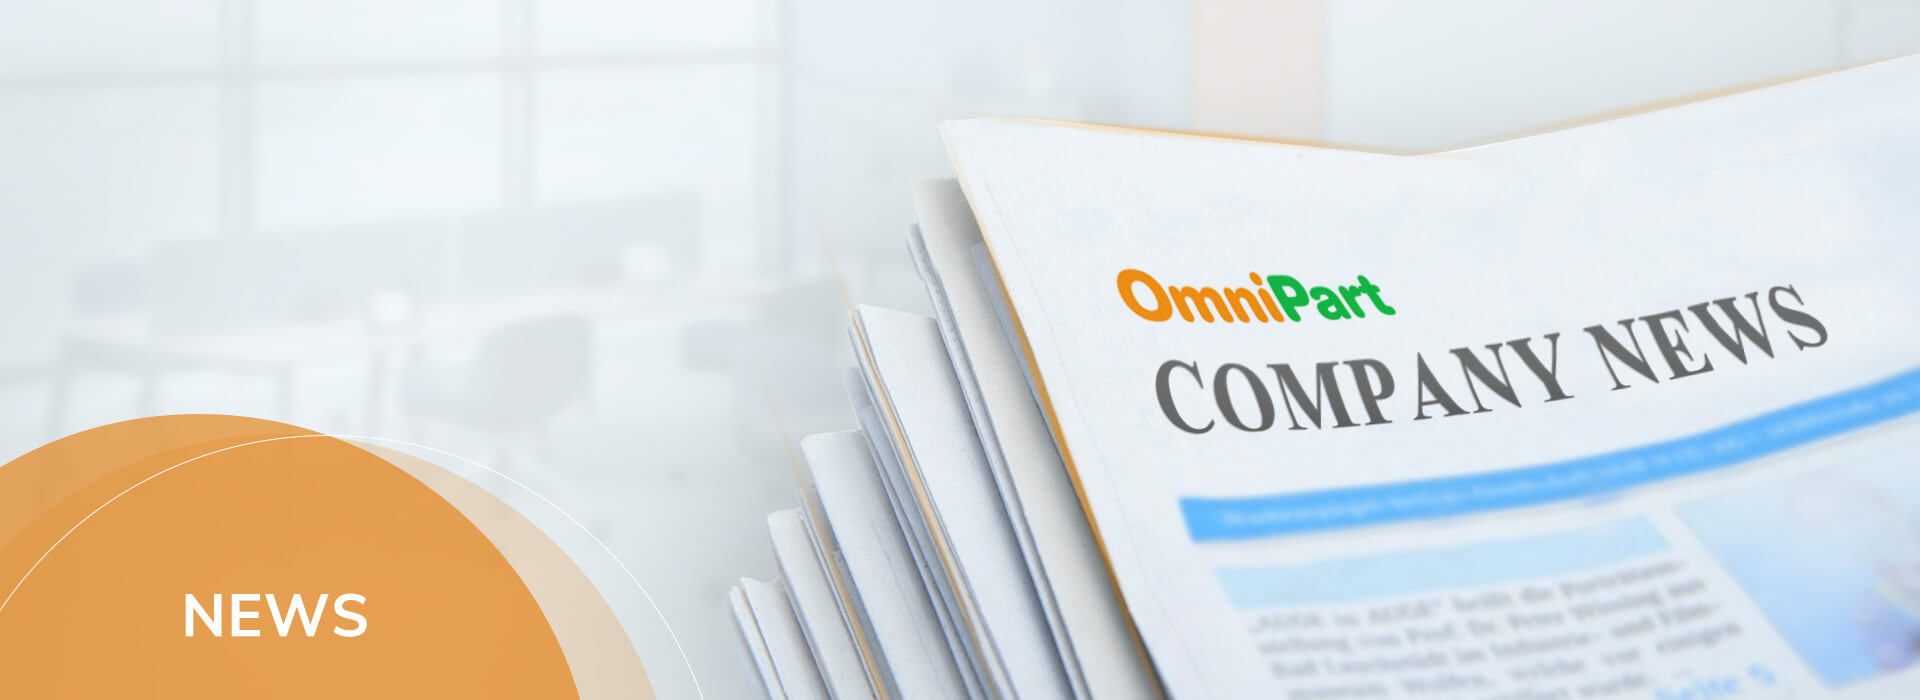 NEWS CENTER ABOUT OMNIPART